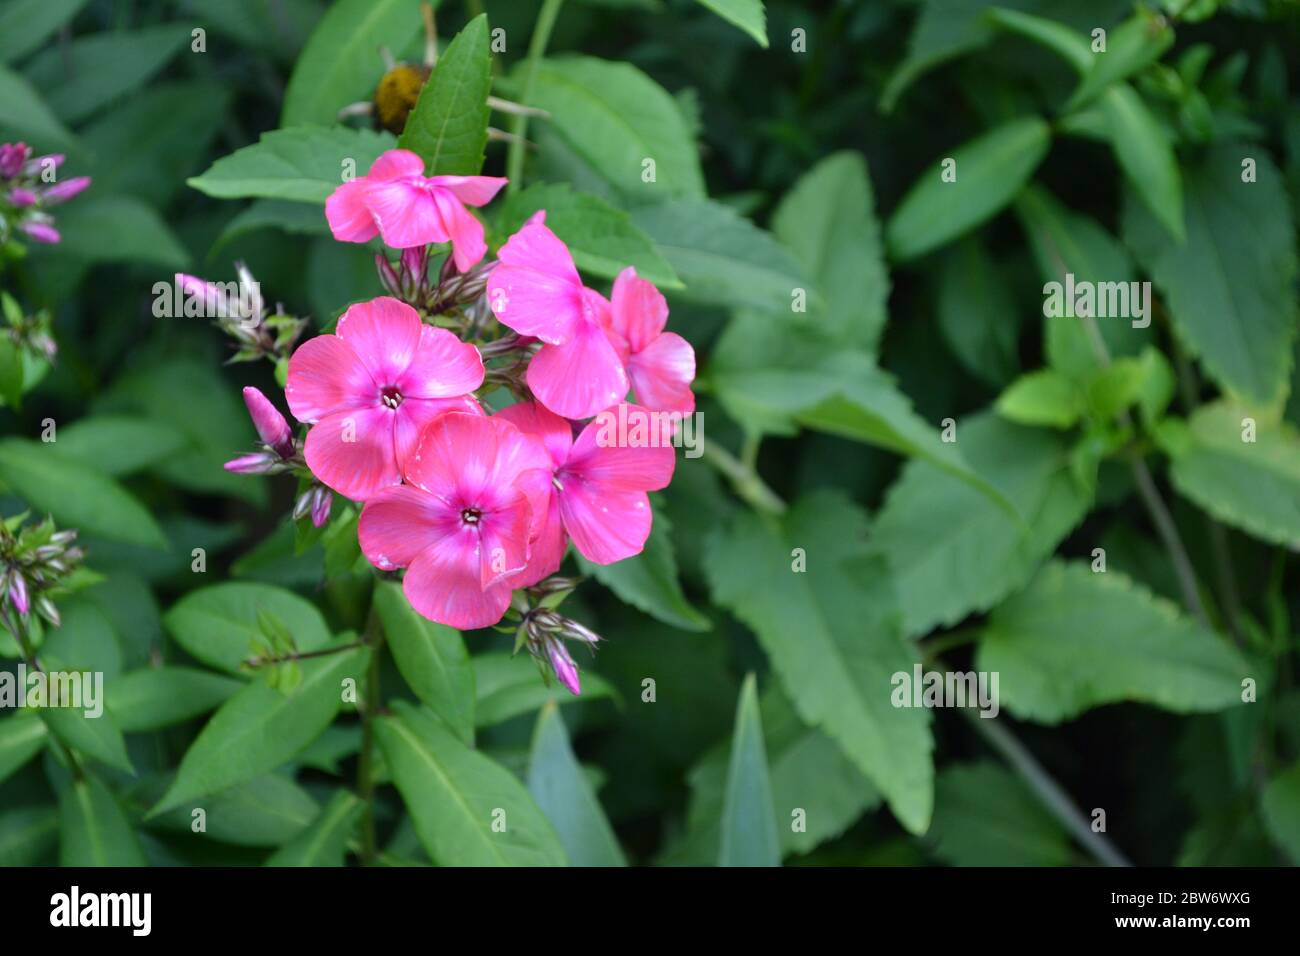 Green leaves, bushes. Beautiful inflorescences. Phlox flower. Perennial herbaceous plant. High branches. Purple flowers Stock Photo